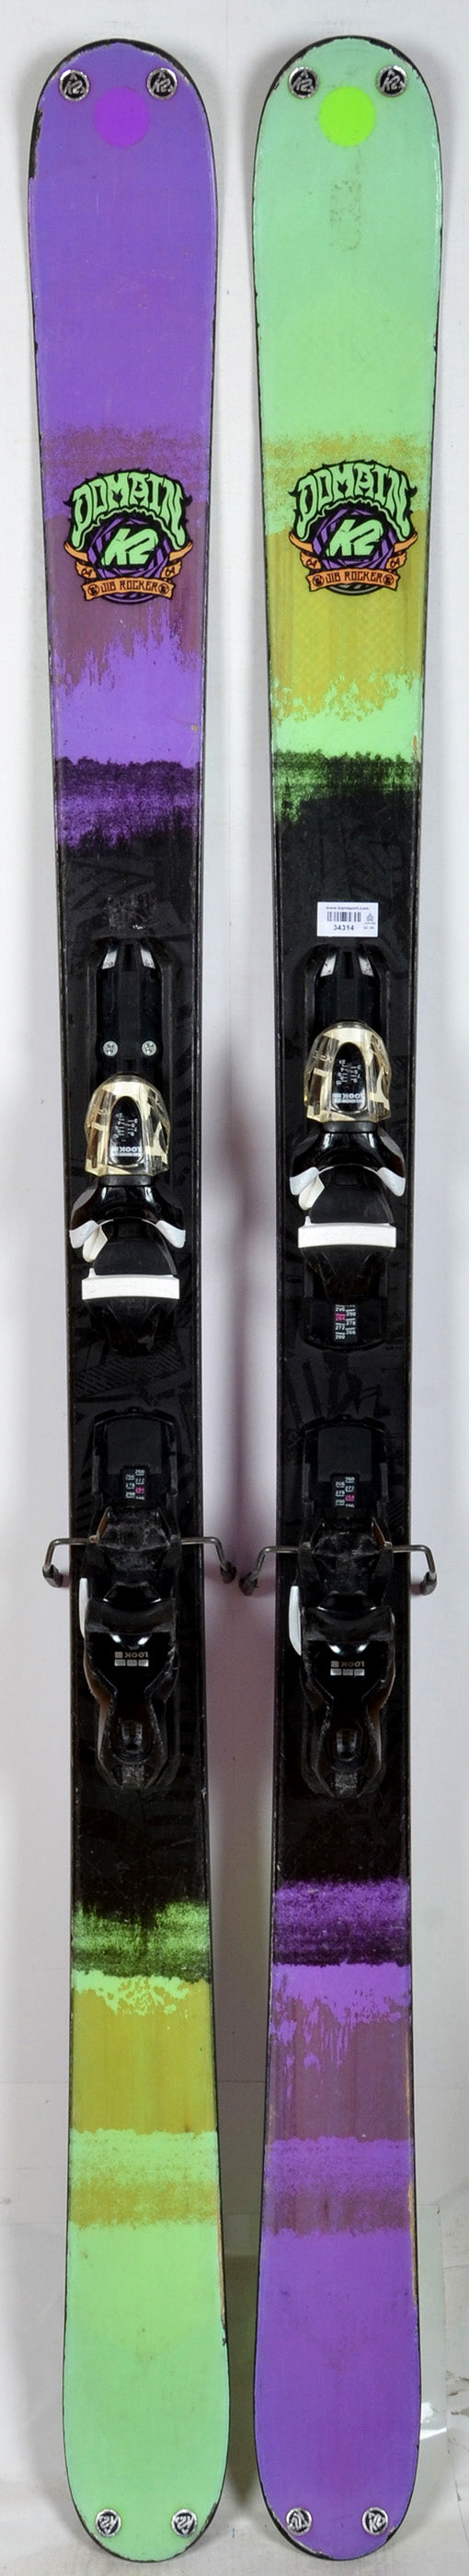 K2 DOMAIN - skis d'occasion